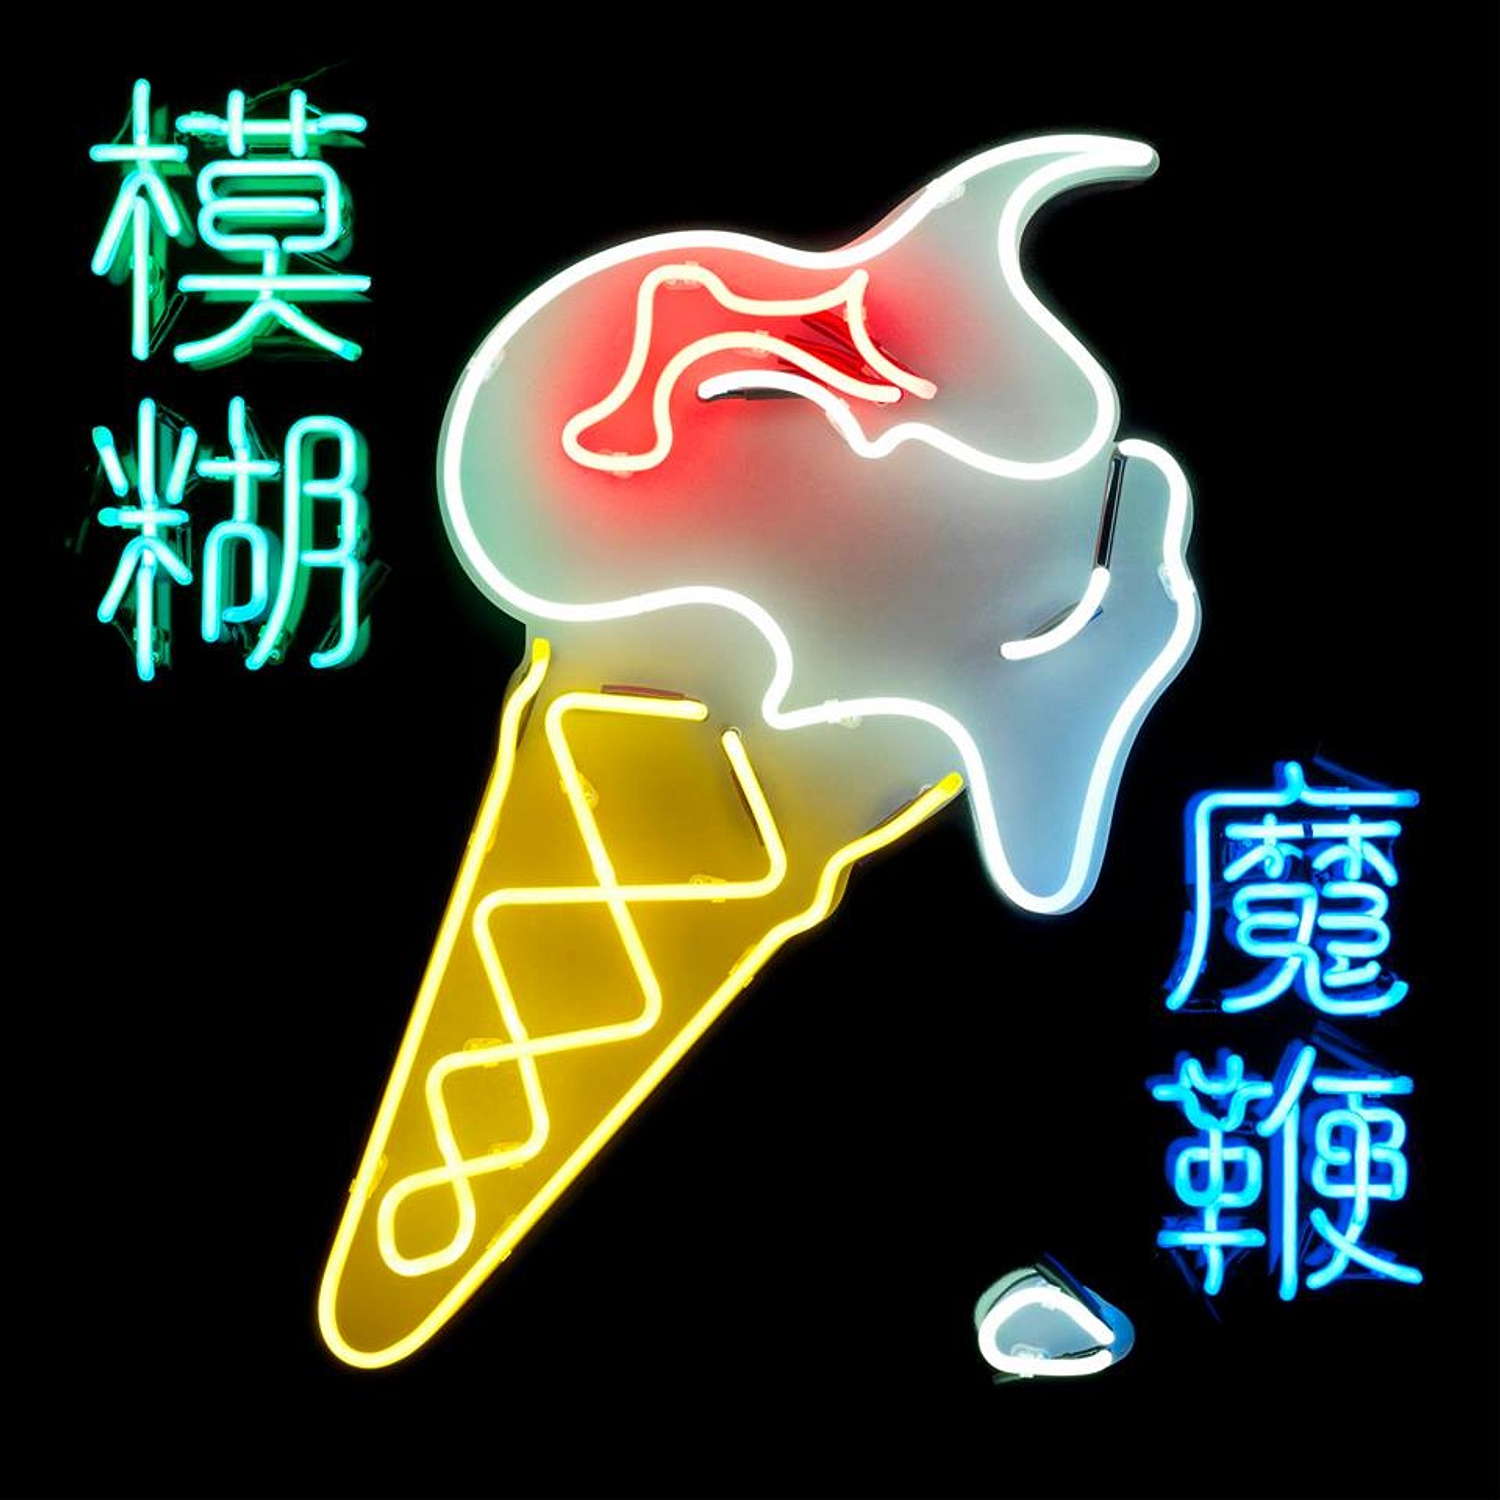 Blur are back! New album 'The Magic Whip' due this April